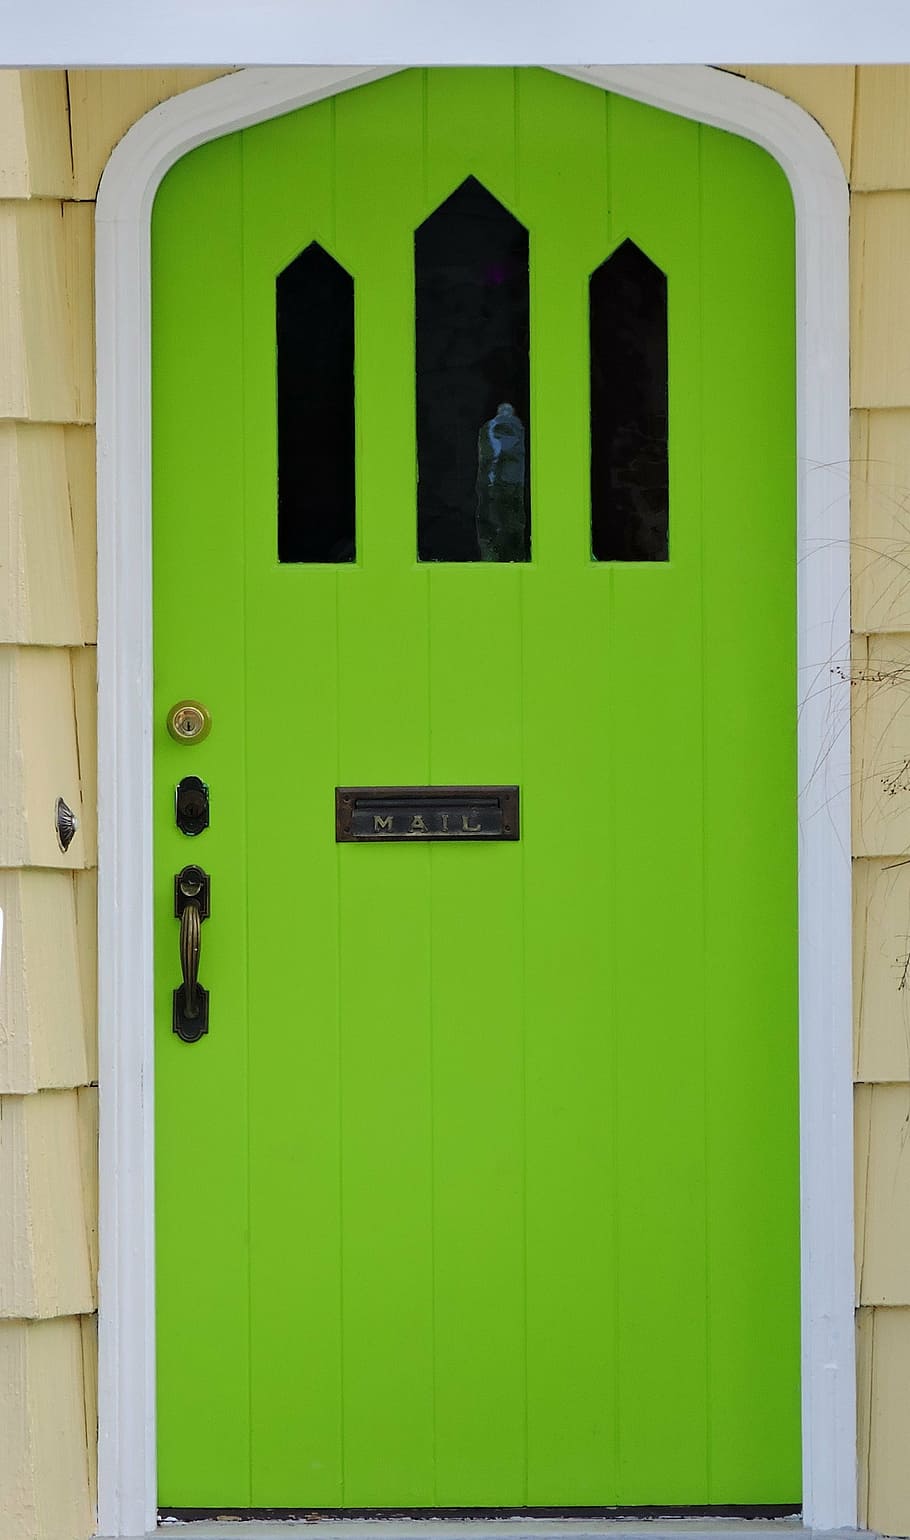 door, front door, green, lime, house, home, front, mail slot, green color, entrance